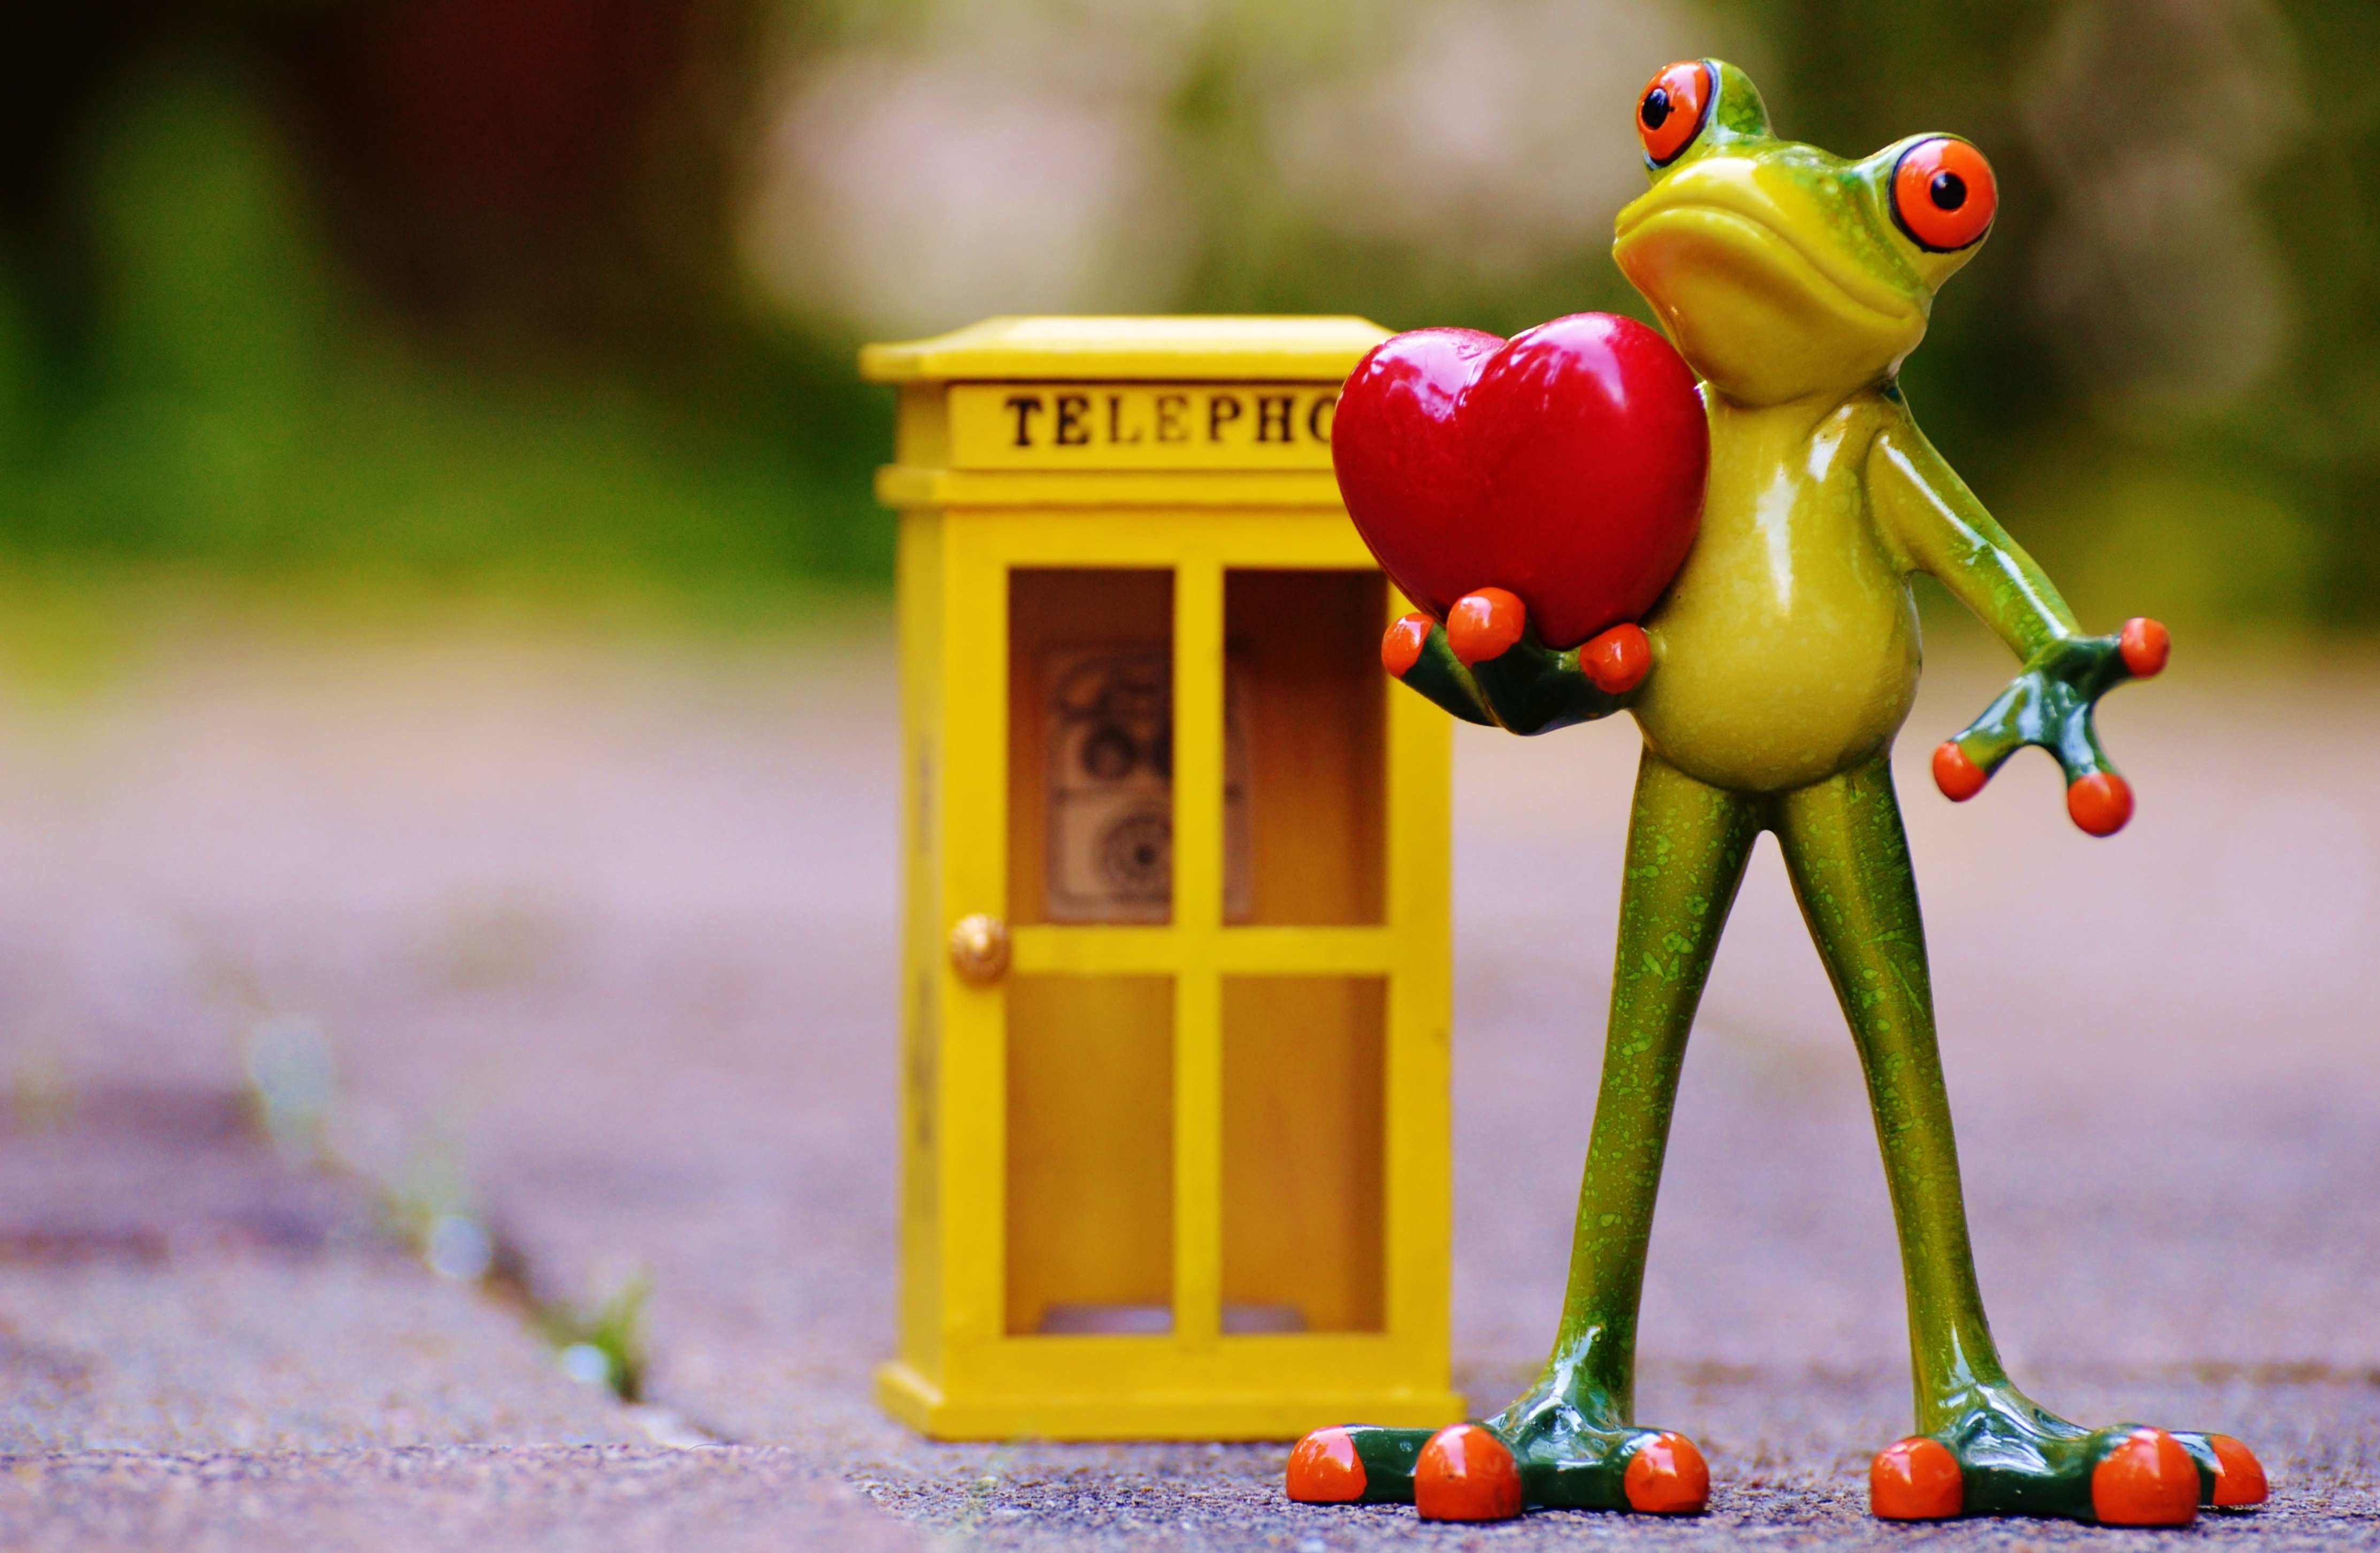 Love, Miss, Phone, Heart, Frog, toy, no people